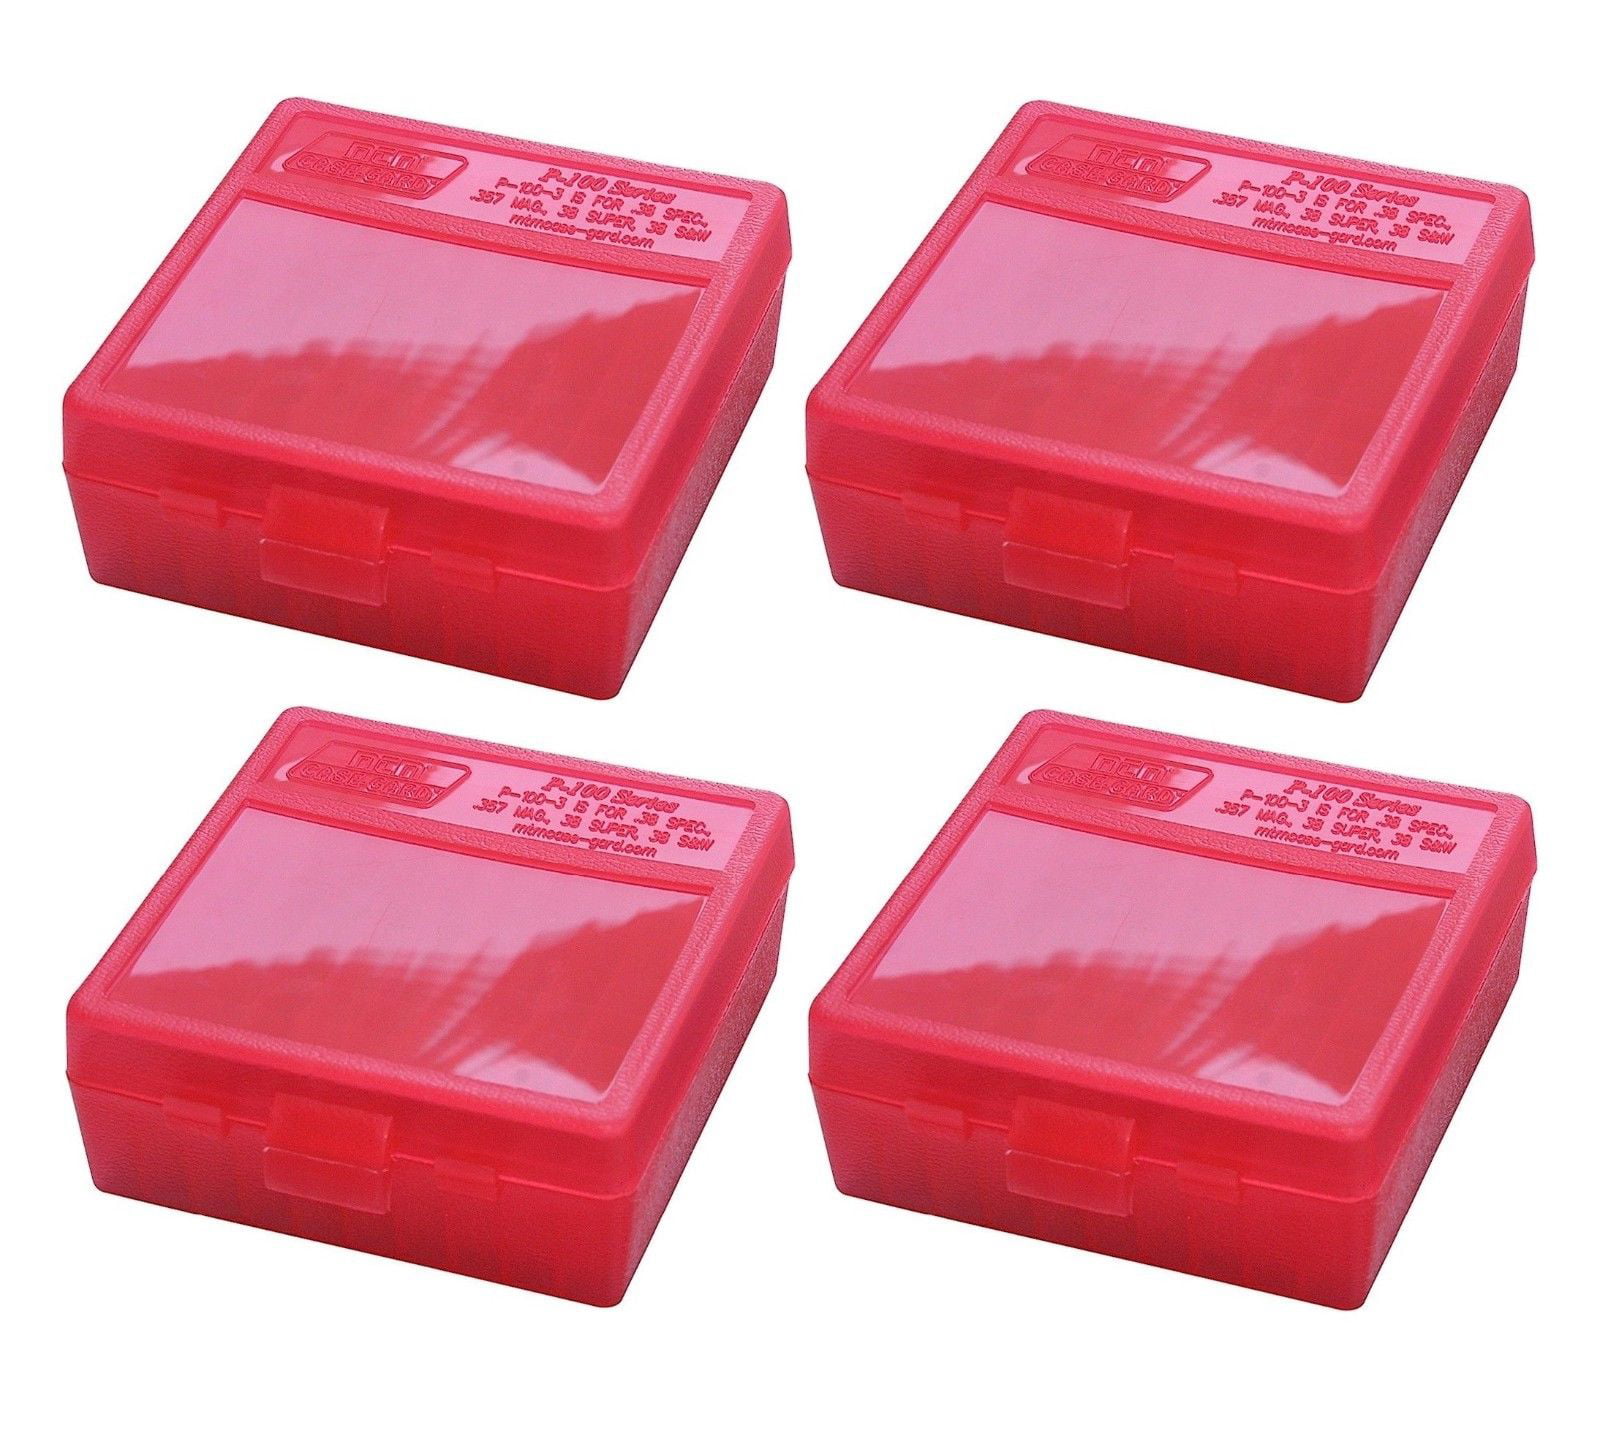 MTM Case Gard™ New MTM Plastic Ammo Box 100 Round 38/357 P100-3-29 CLEAR RED 